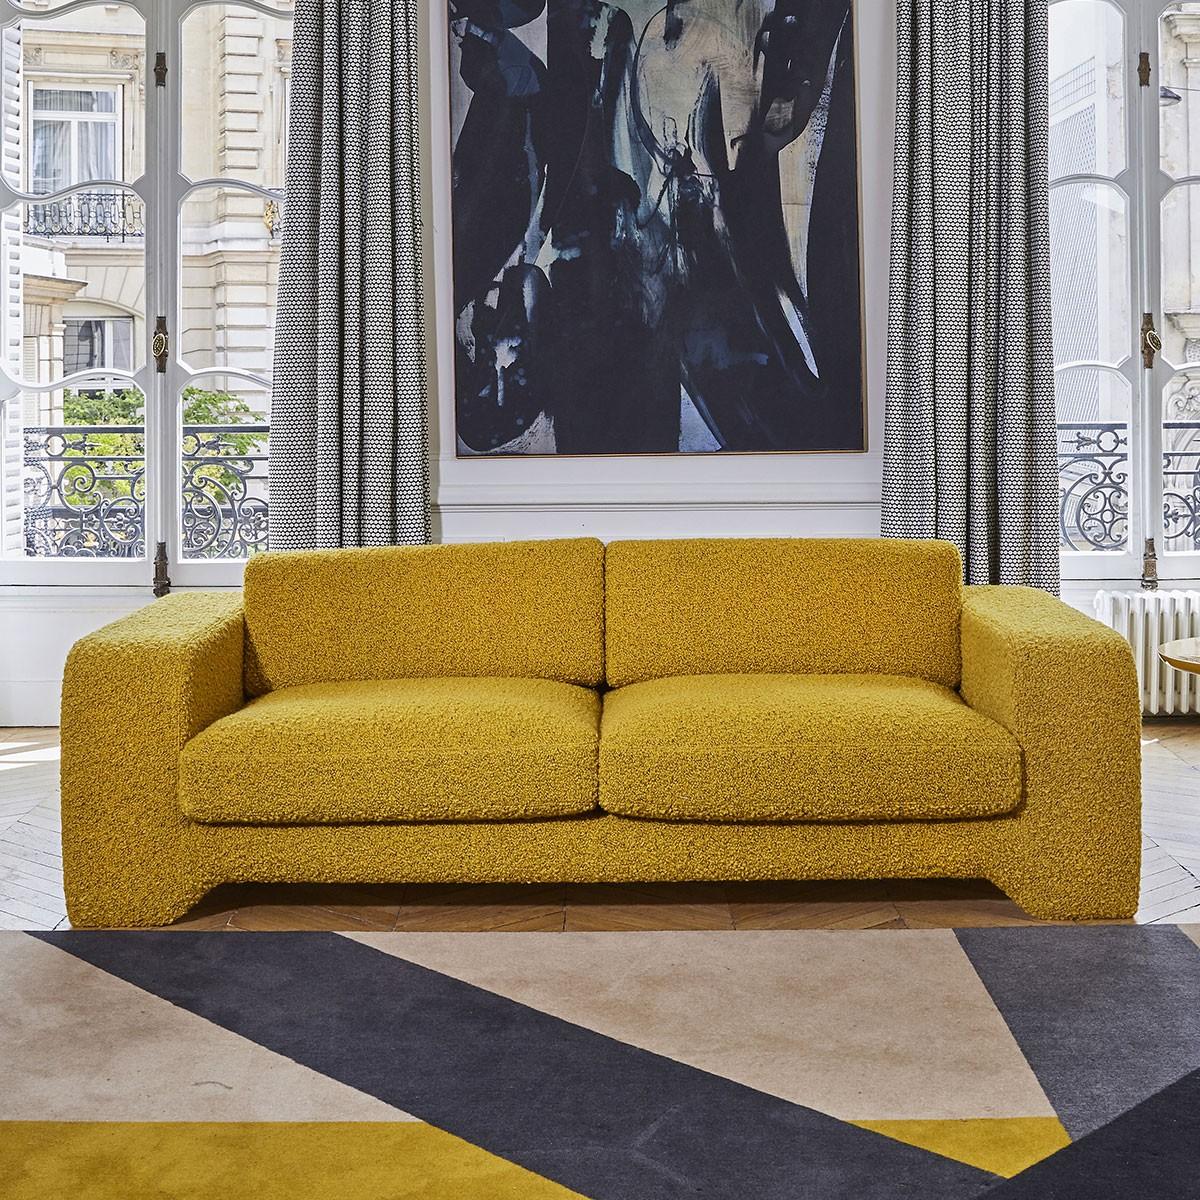 Popus Editions Giovanna 2.5 seater sofa in pink verone velvet upholstery

Giovanna is a sofa with a strong profile. A sober, plush line, with this famous detail that changes everything, so as not to forget its strength of character and this